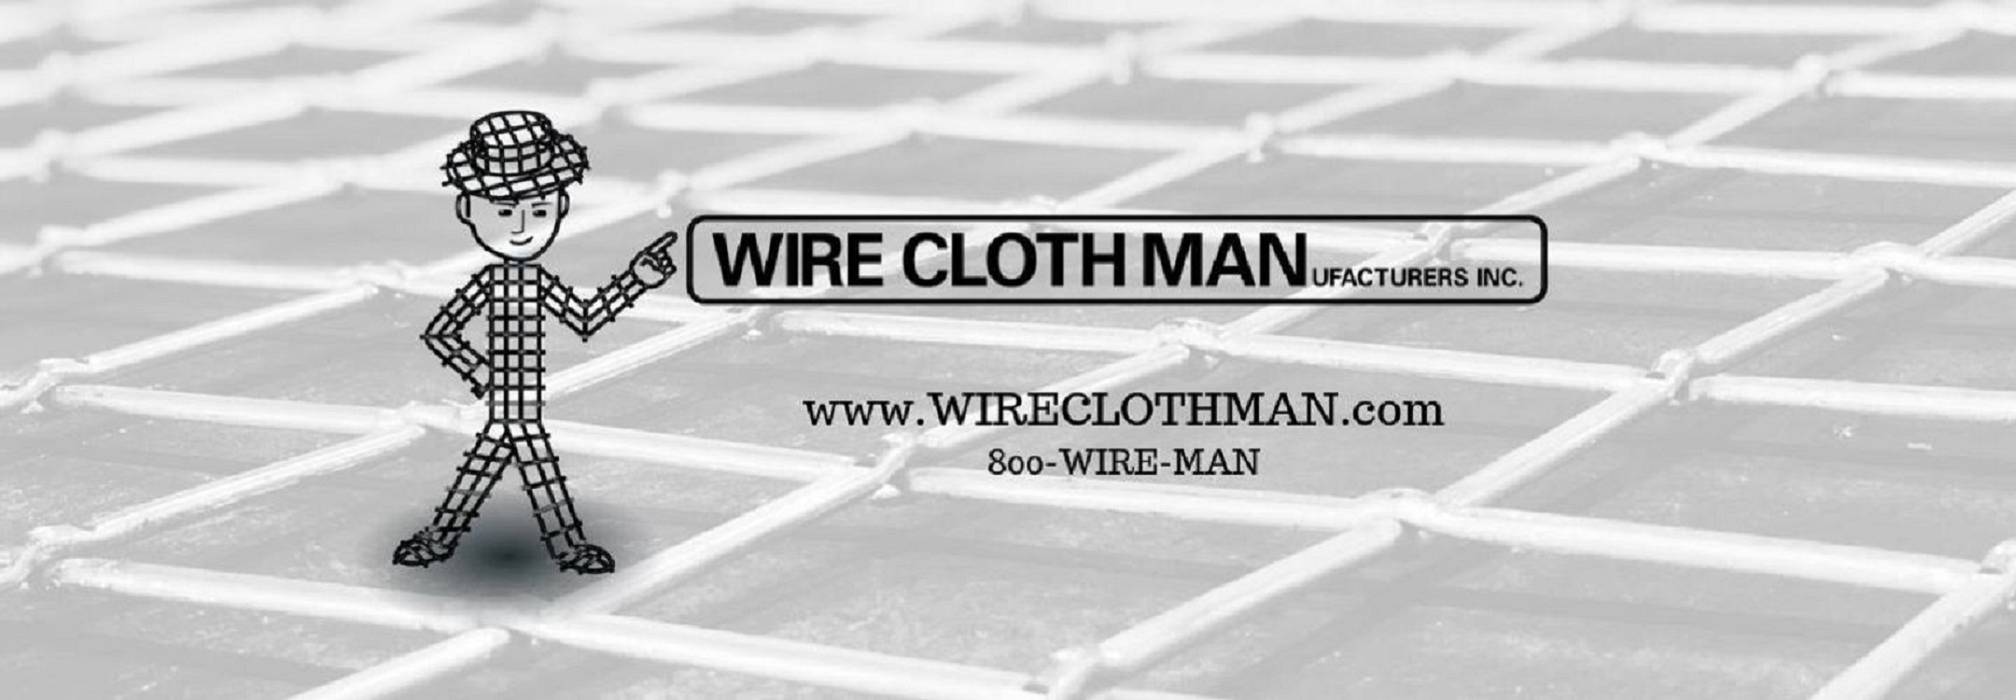 CUSTOM FABRICATION, Wire Cloth Manufacturers, Inc. Wire Cloth Manufacturers, Inc. Halaman depan